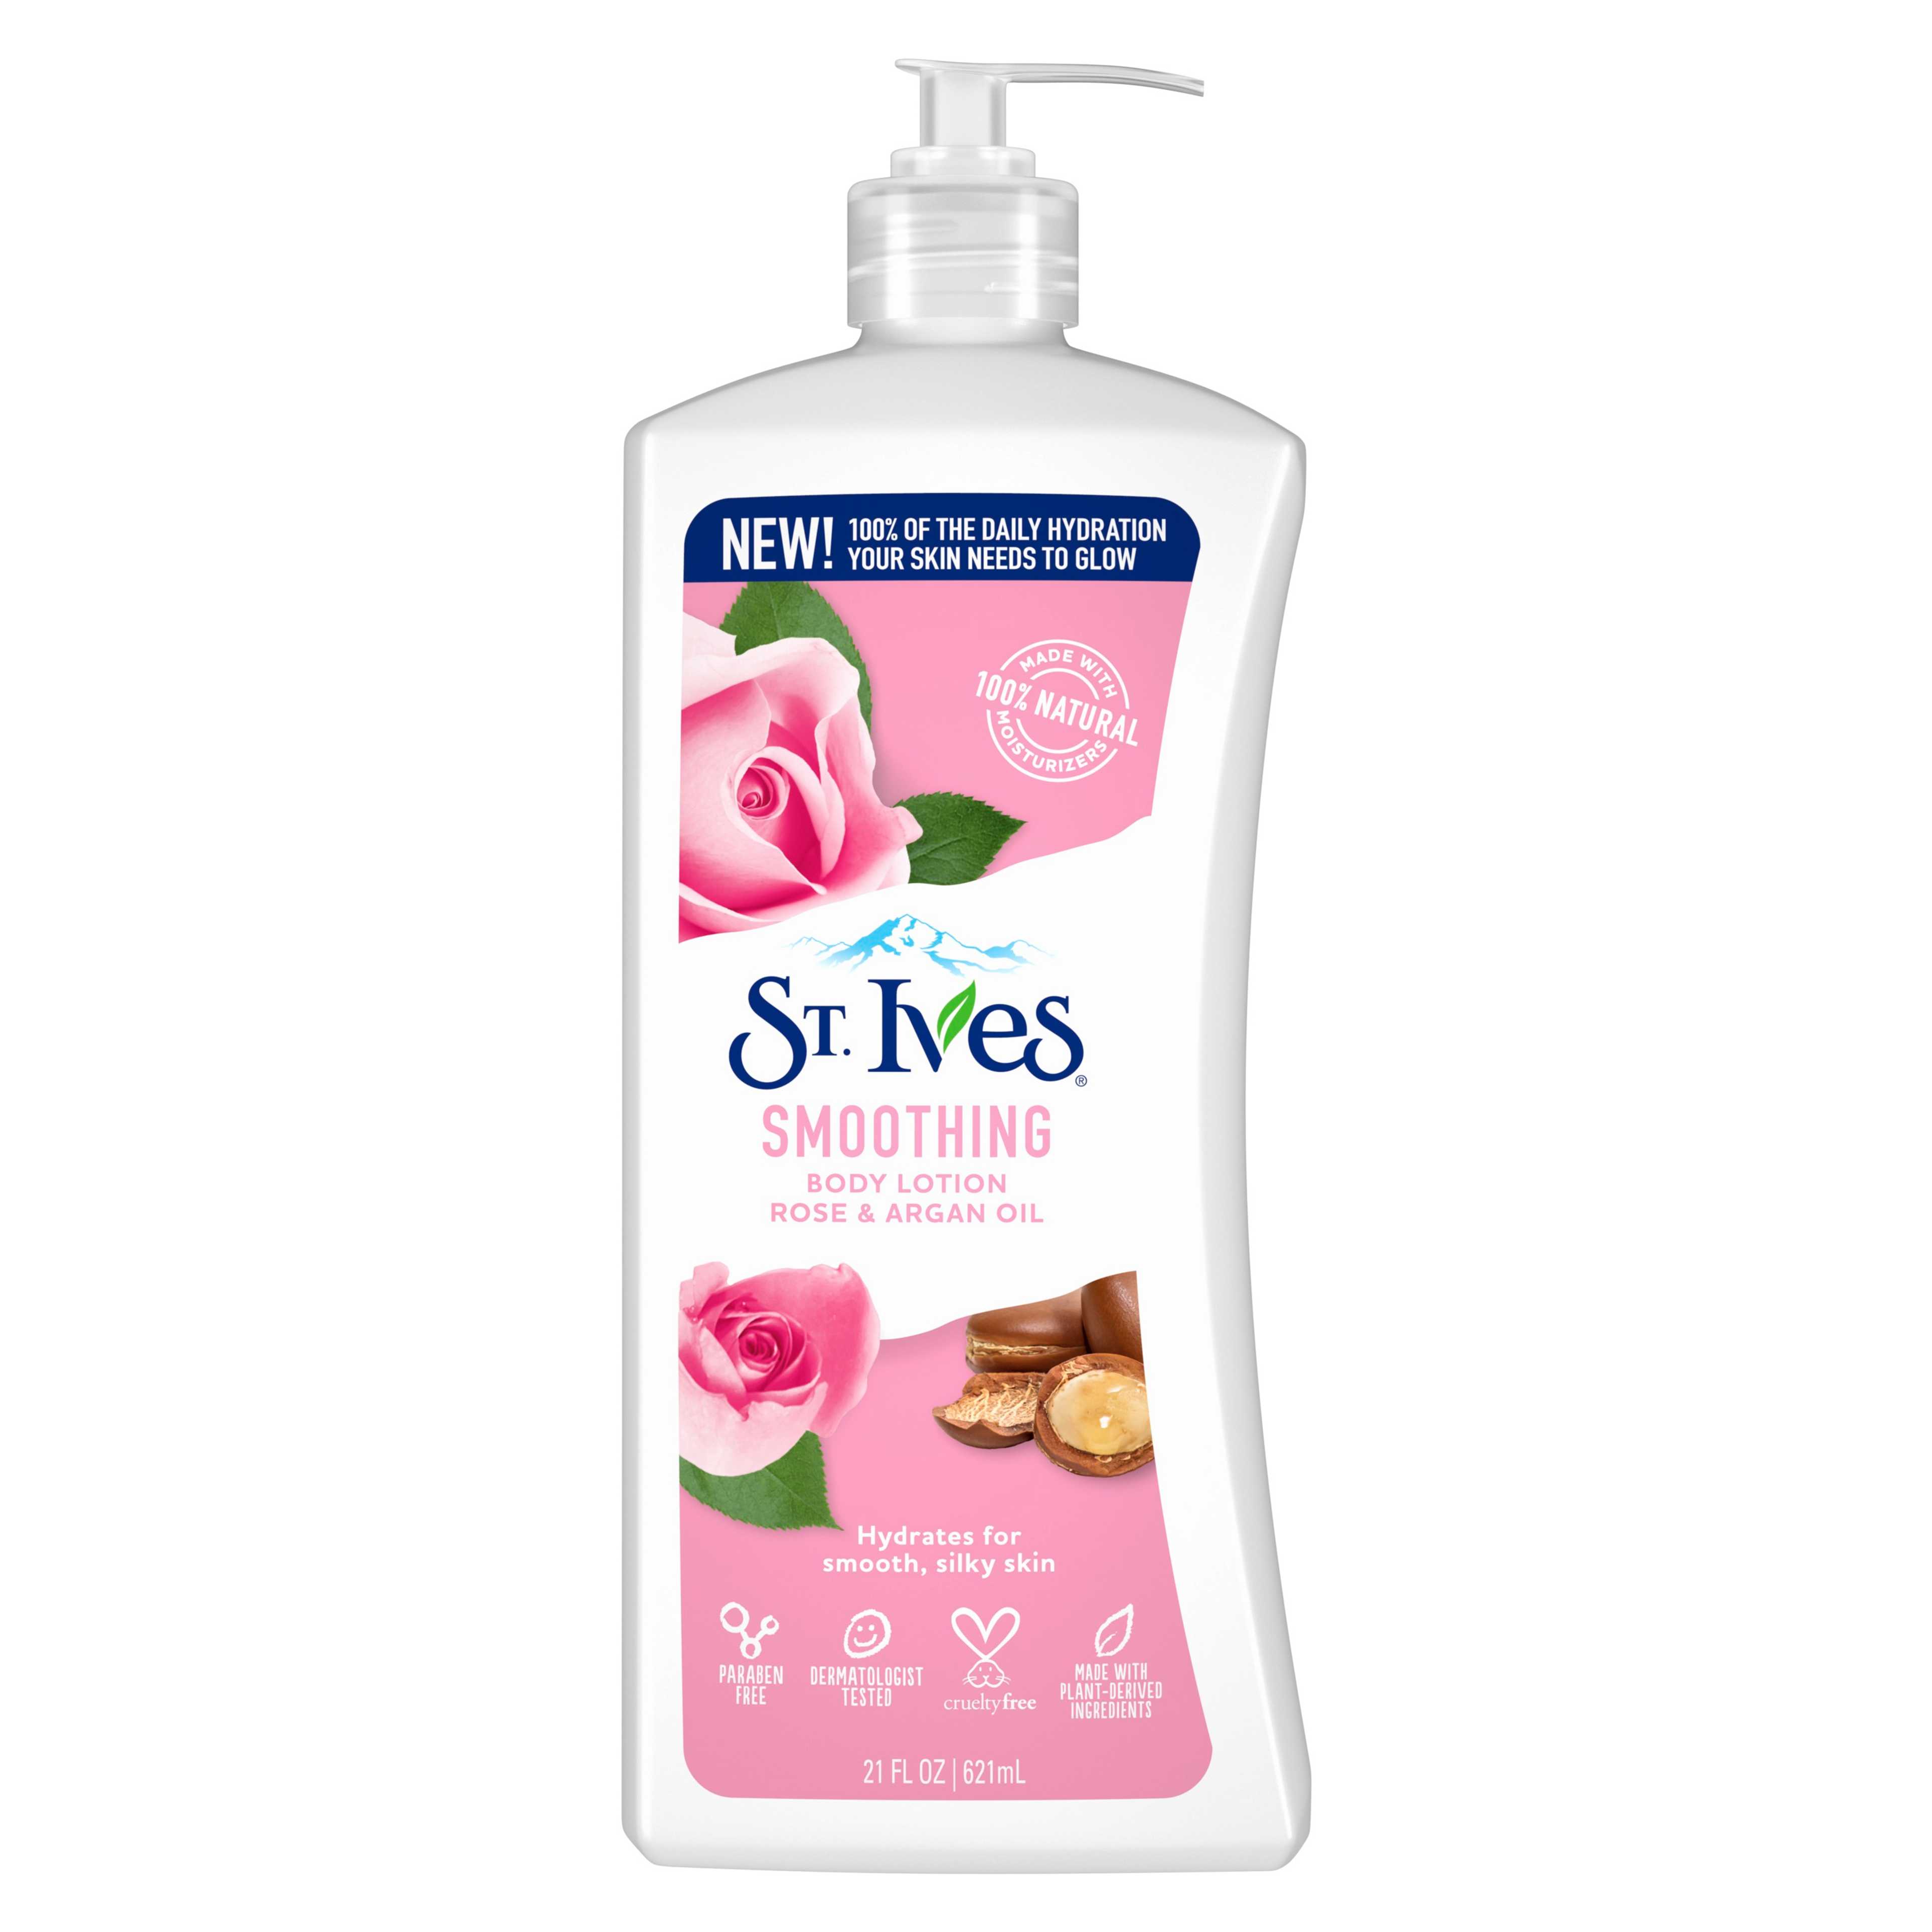 St Ives Smoothing Rose & Argan Oil Body Lotion